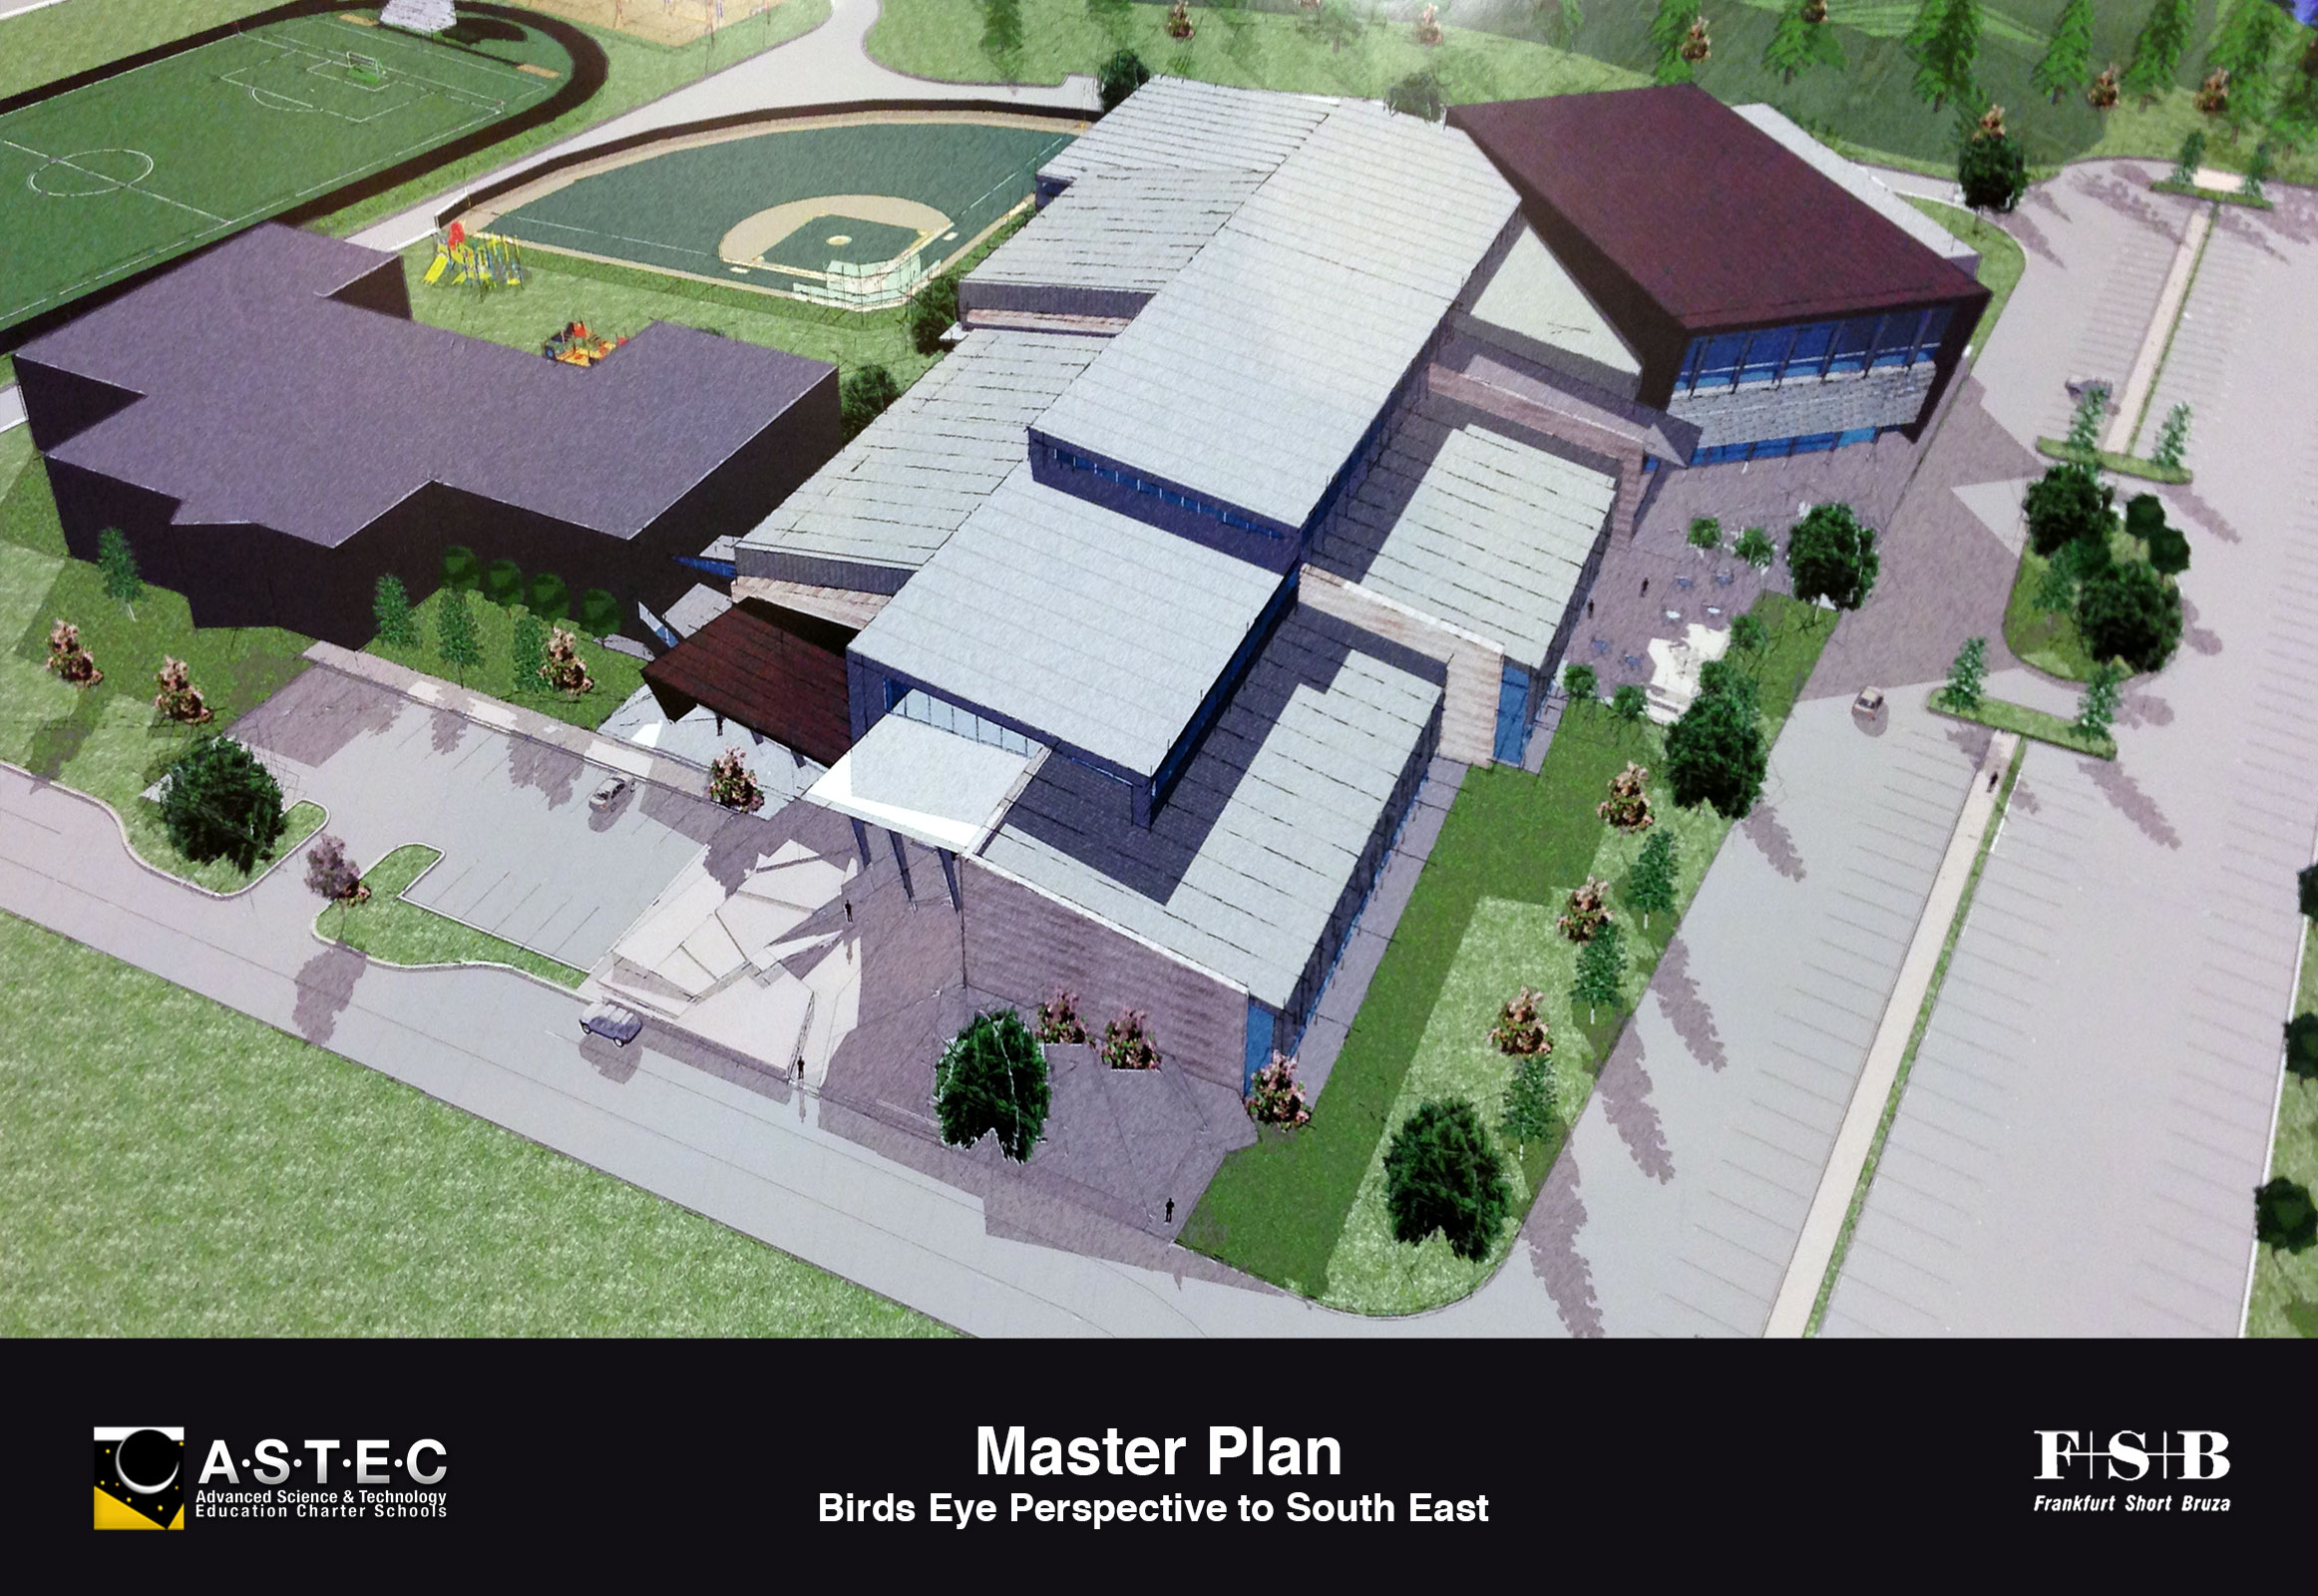 Astec Charter Schools Is Proud To Announce Plans For A New Innovative